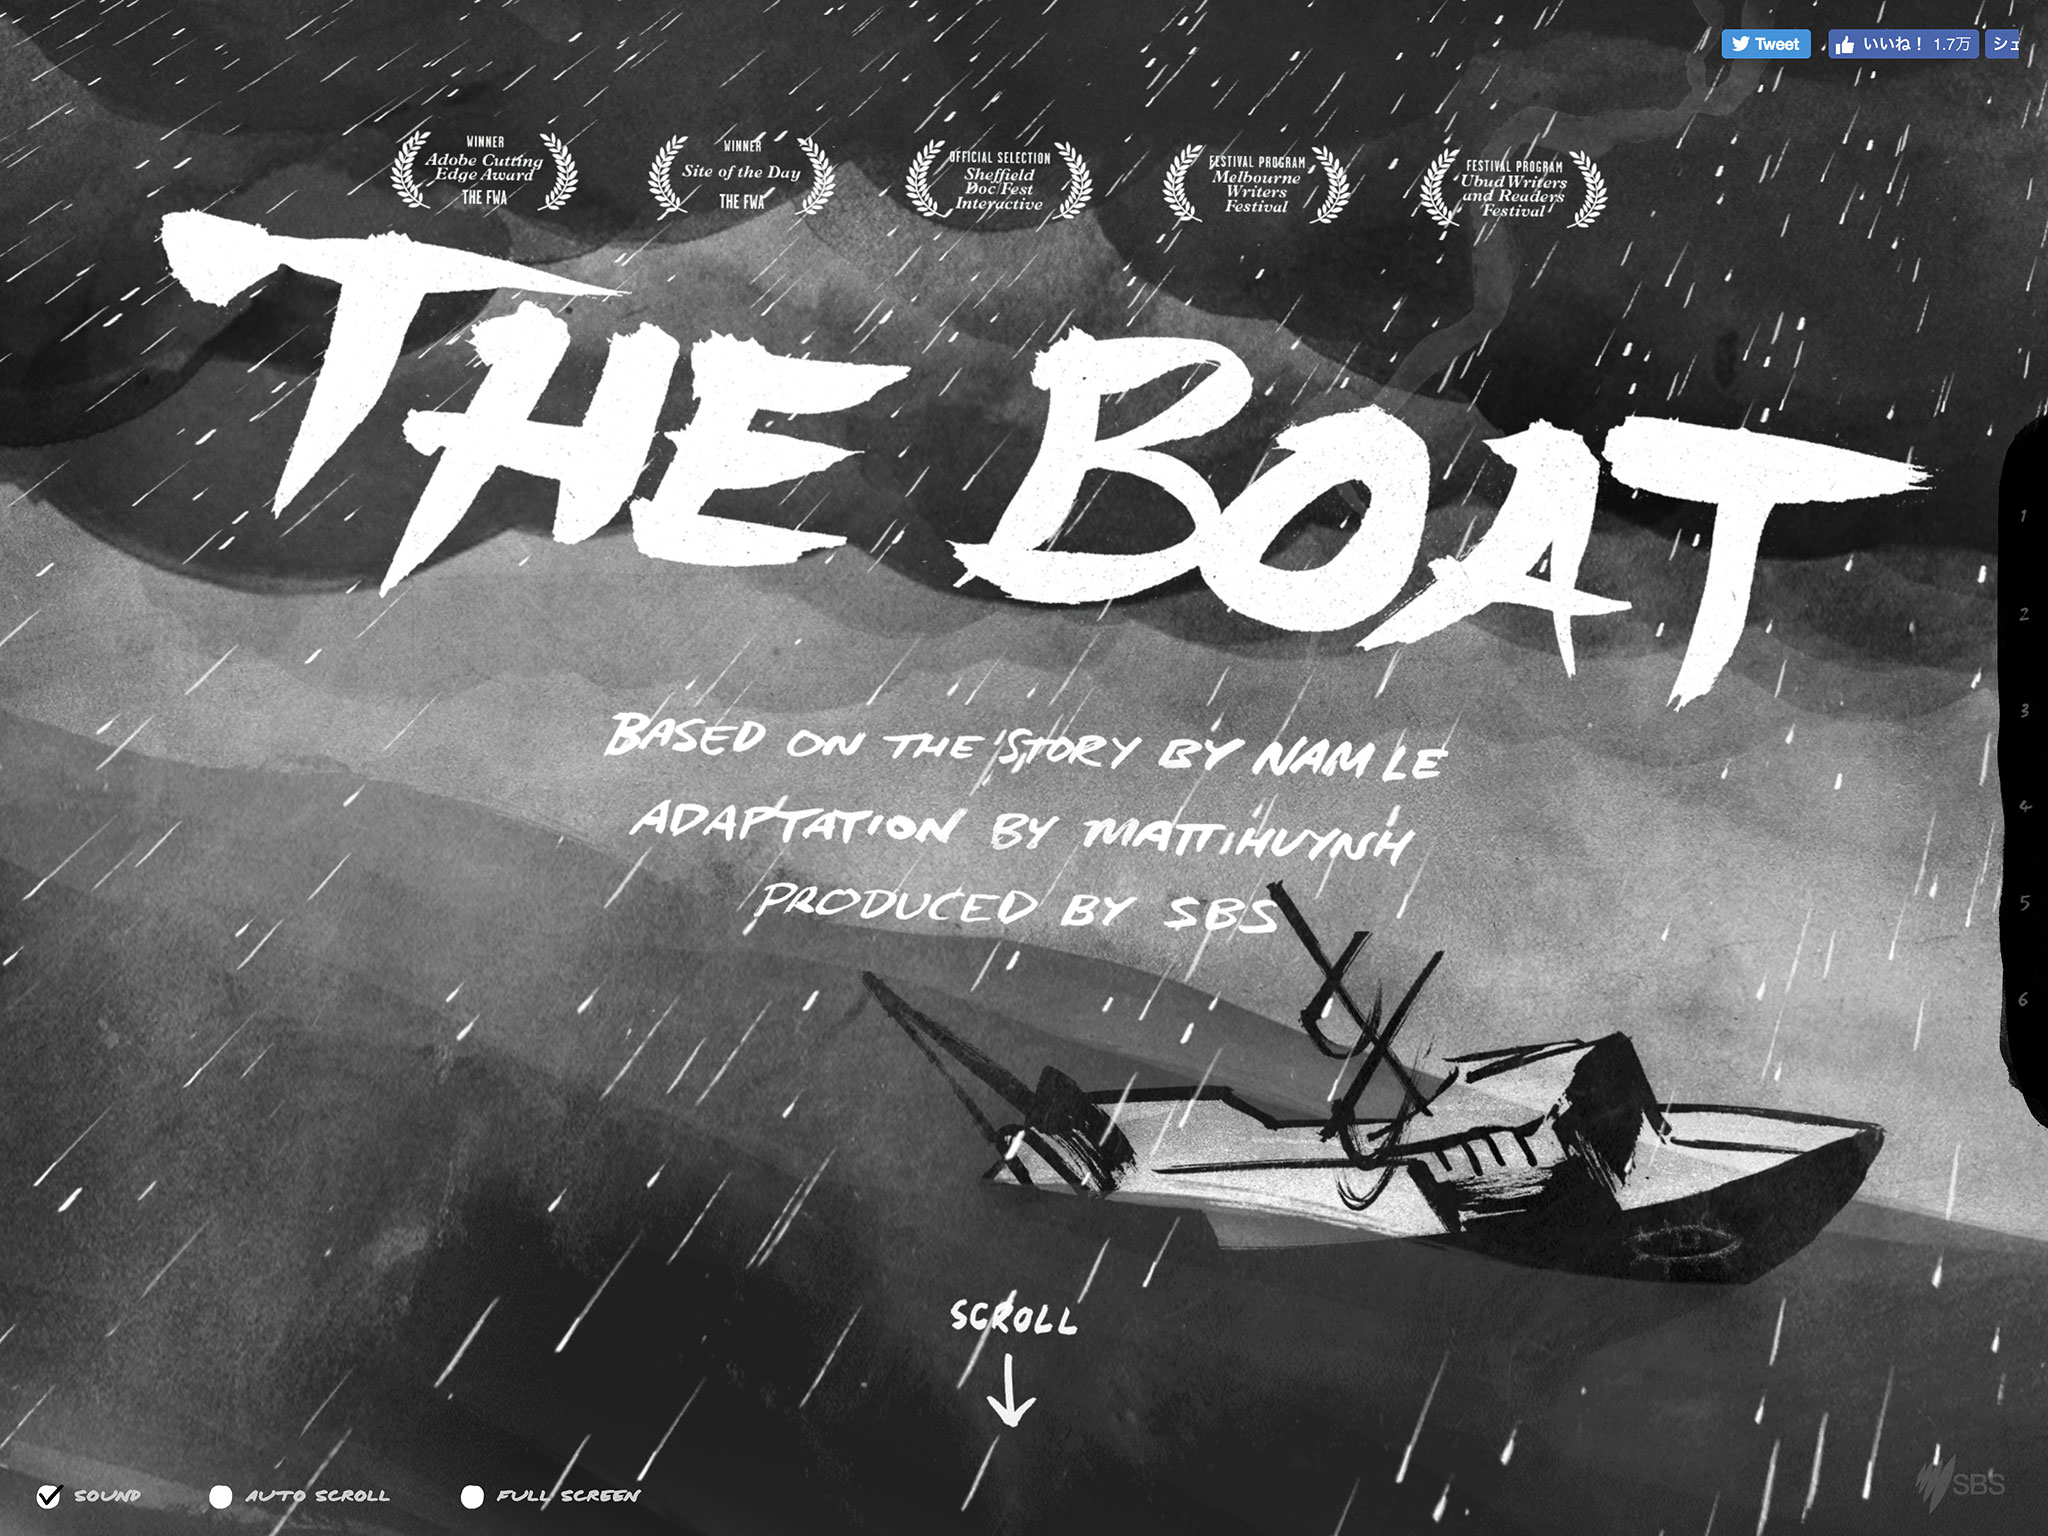 The Boat | SBS